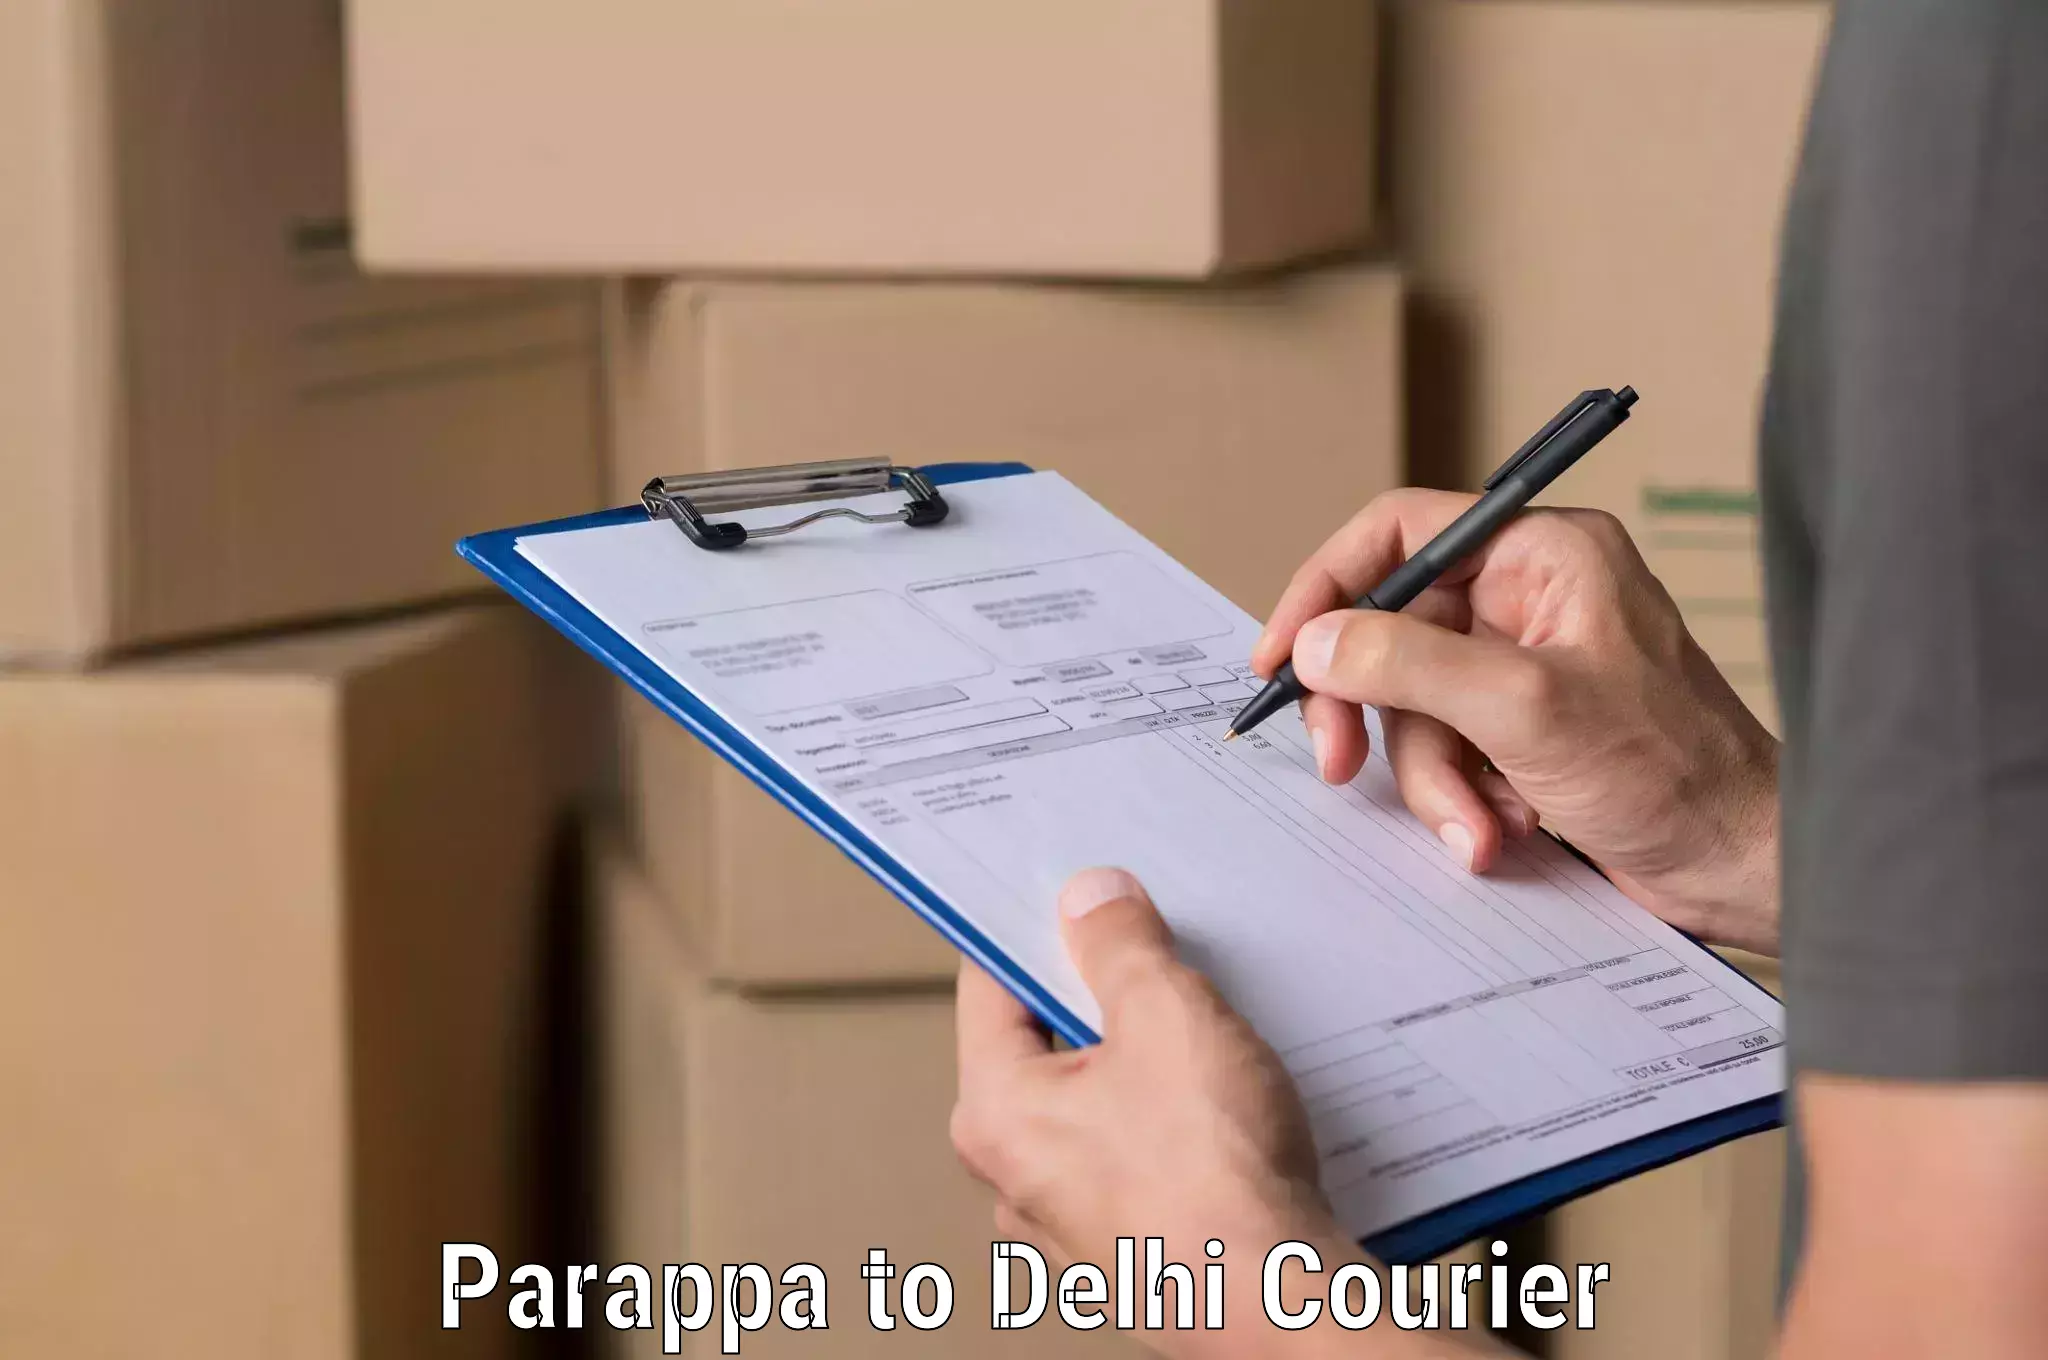 Air courier services Parappa to Delhi